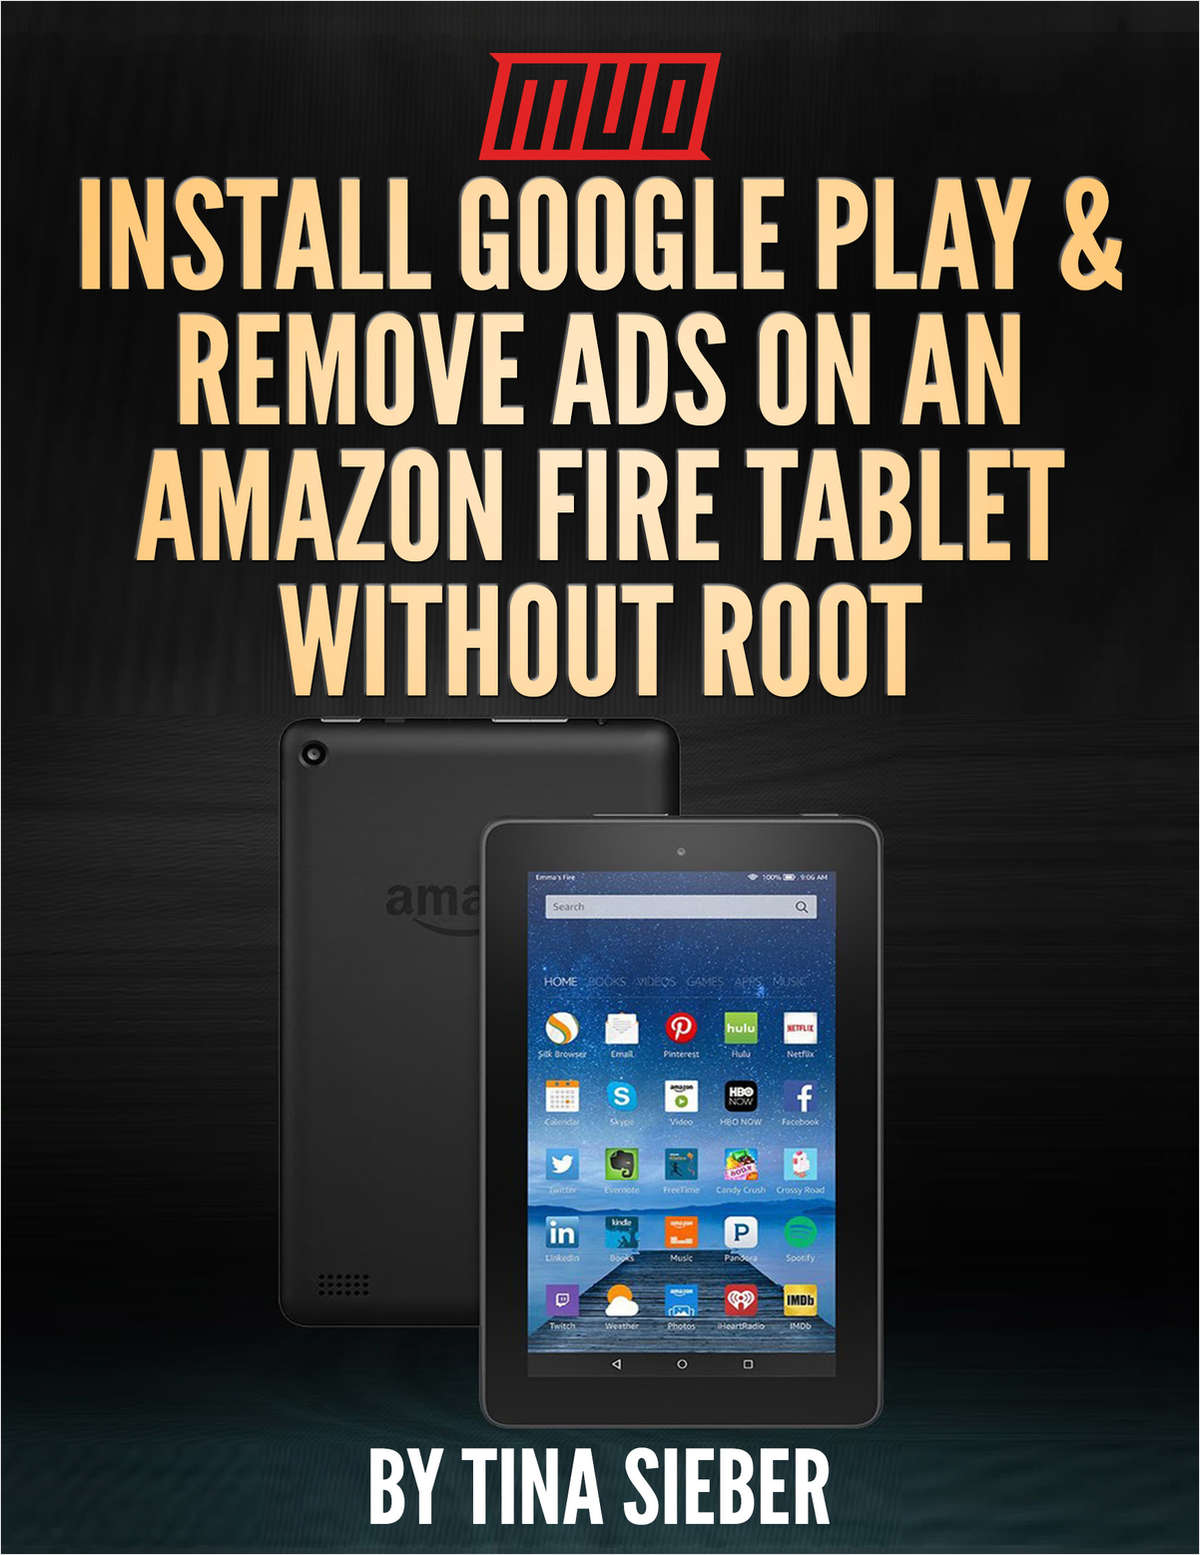 How to Install Google Play on Kindle Fire